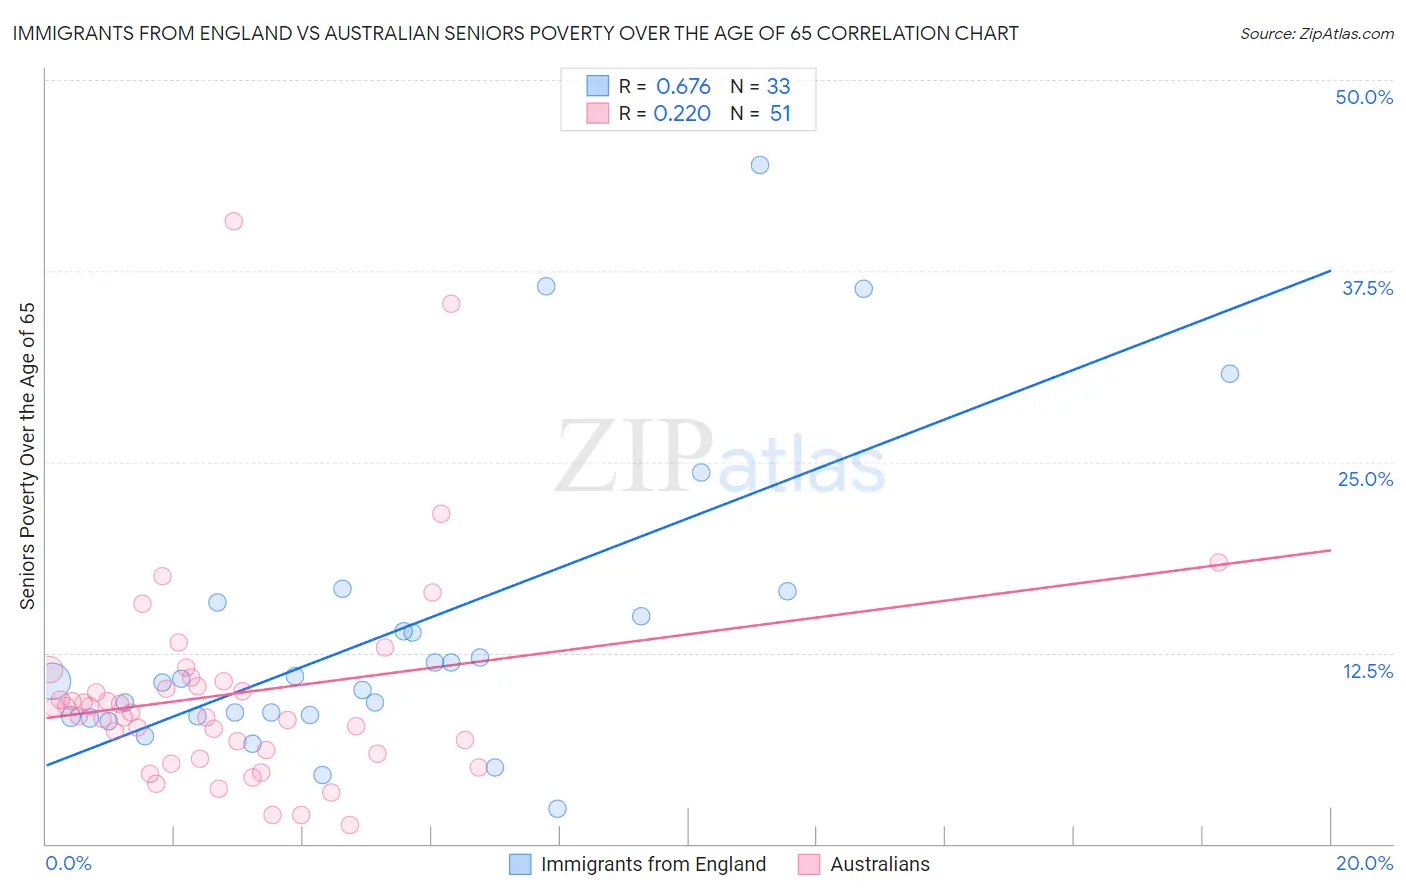 Immigrants from England vs Australian Seniors Poverty Over the Age of 65